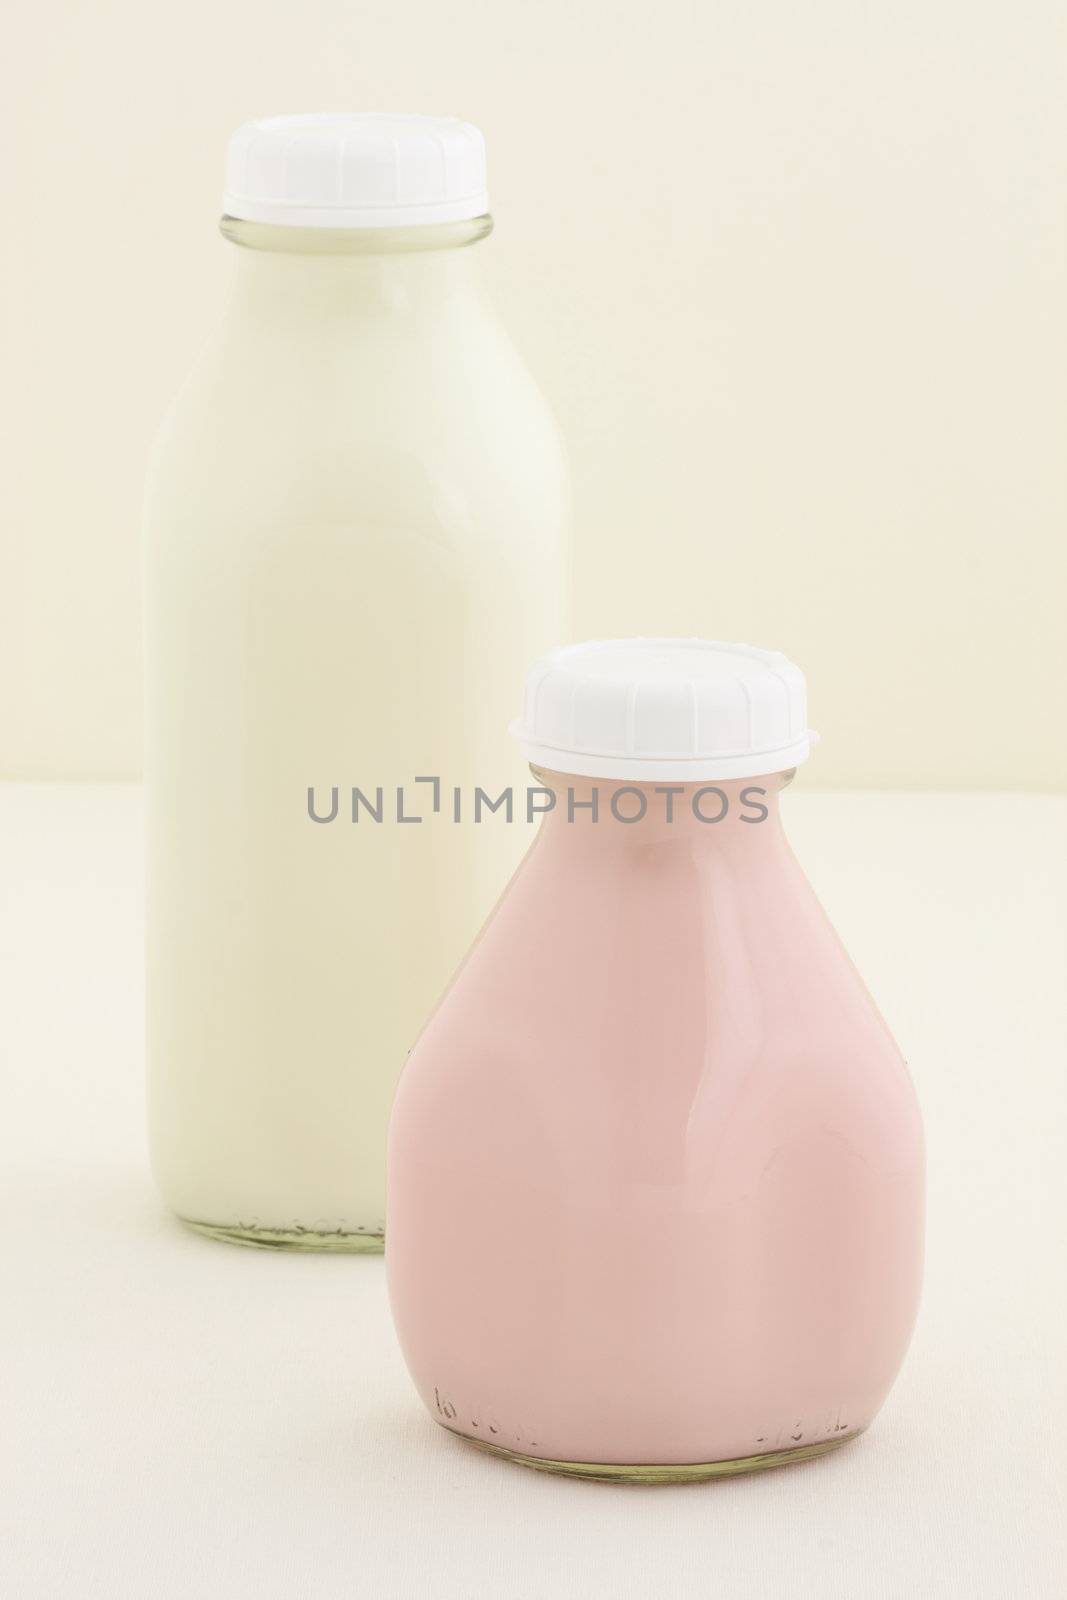 Delicious, nutritious and fresh Strawberry milk pint, made with organic real fruit and regular Milk Bottle.